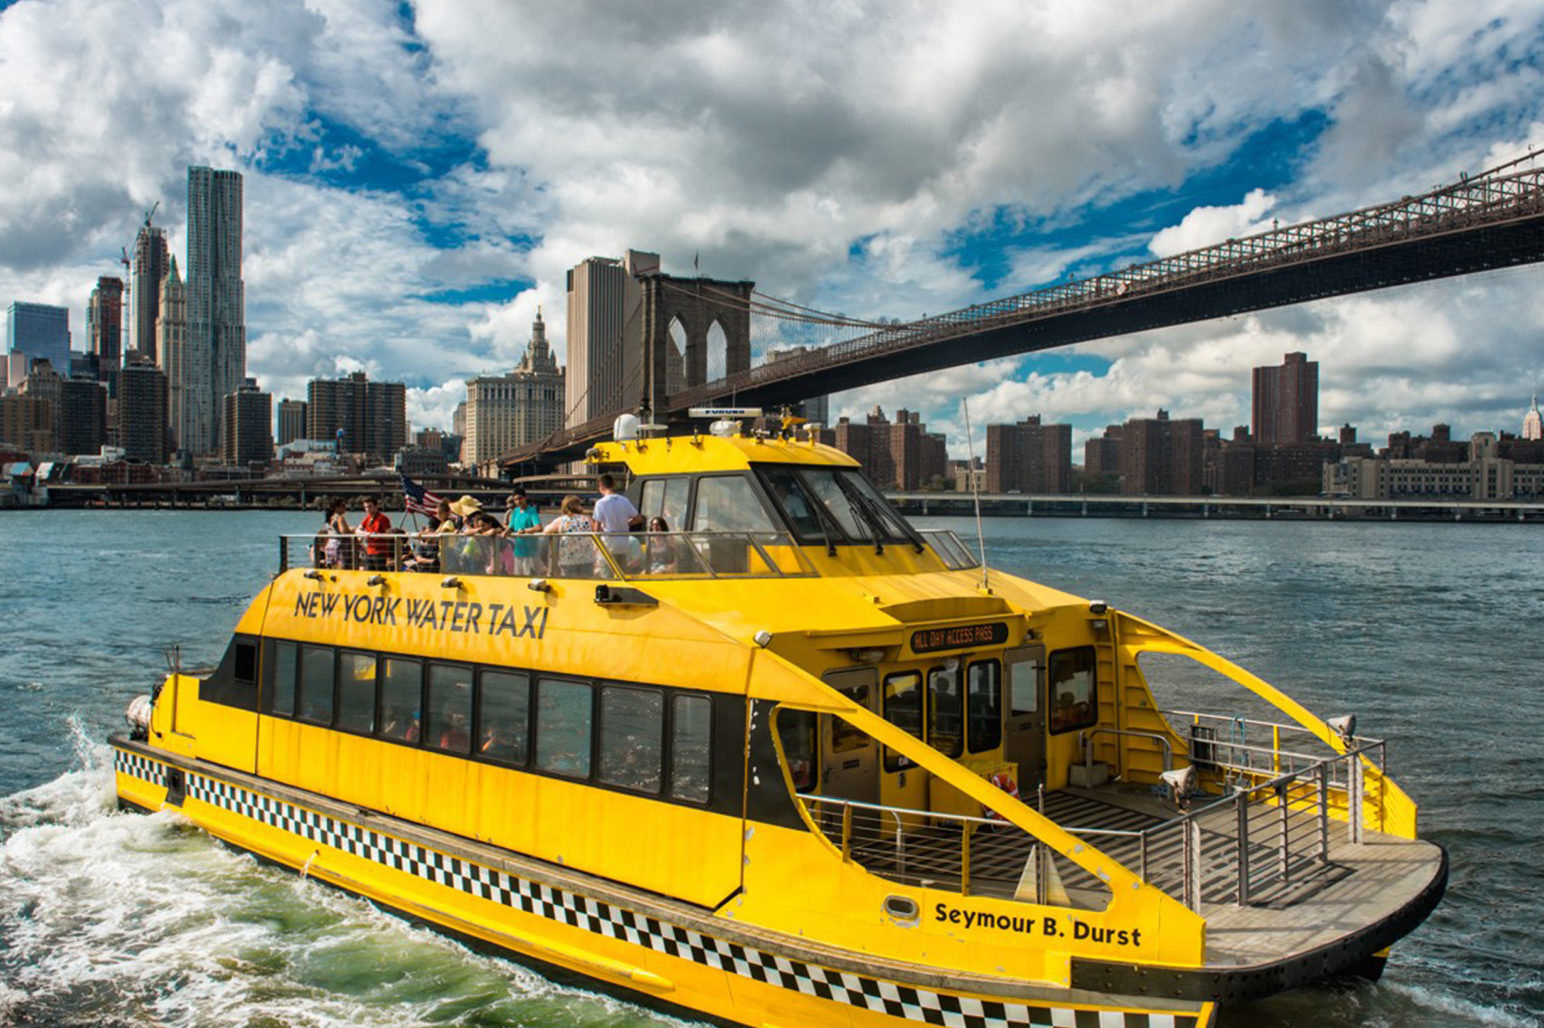 The History of New York Water Taxi New York Water Taxi